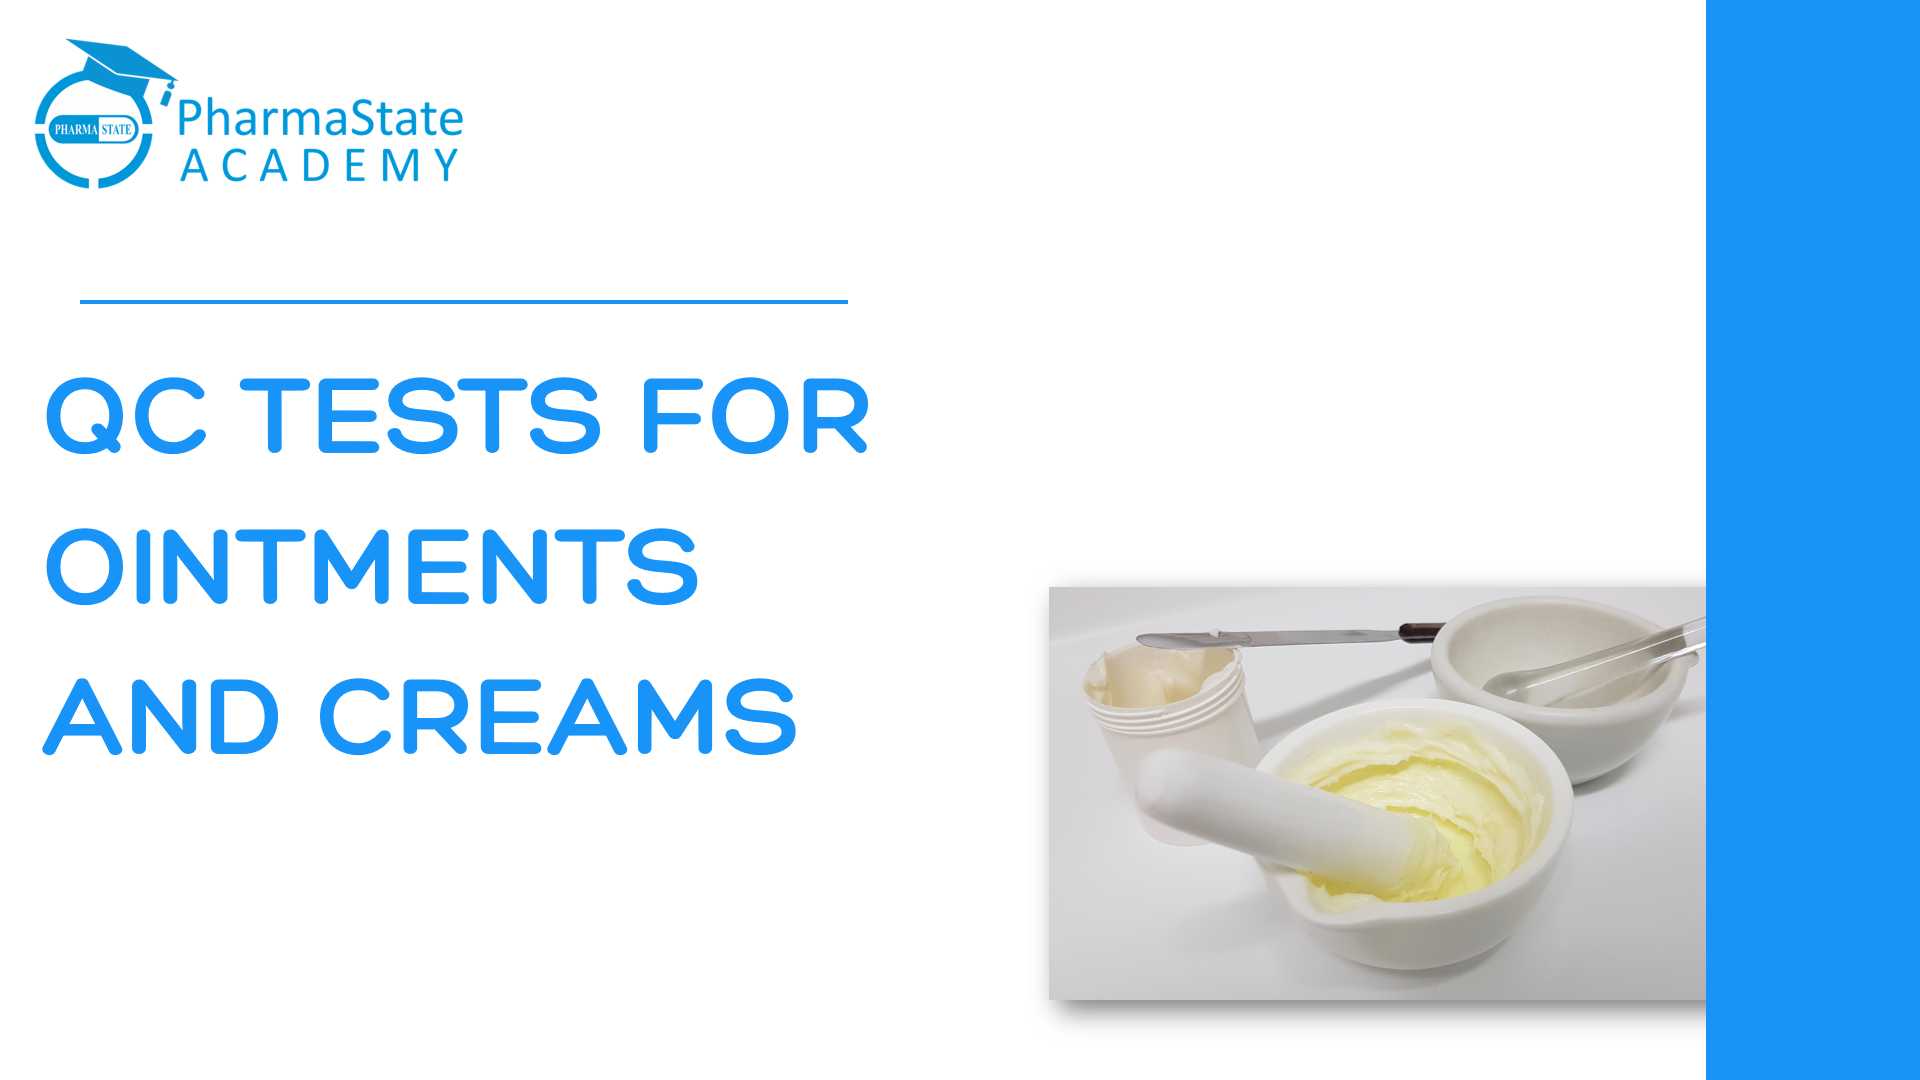 QC TESTS FOR OINTMENTS AND CREAMS